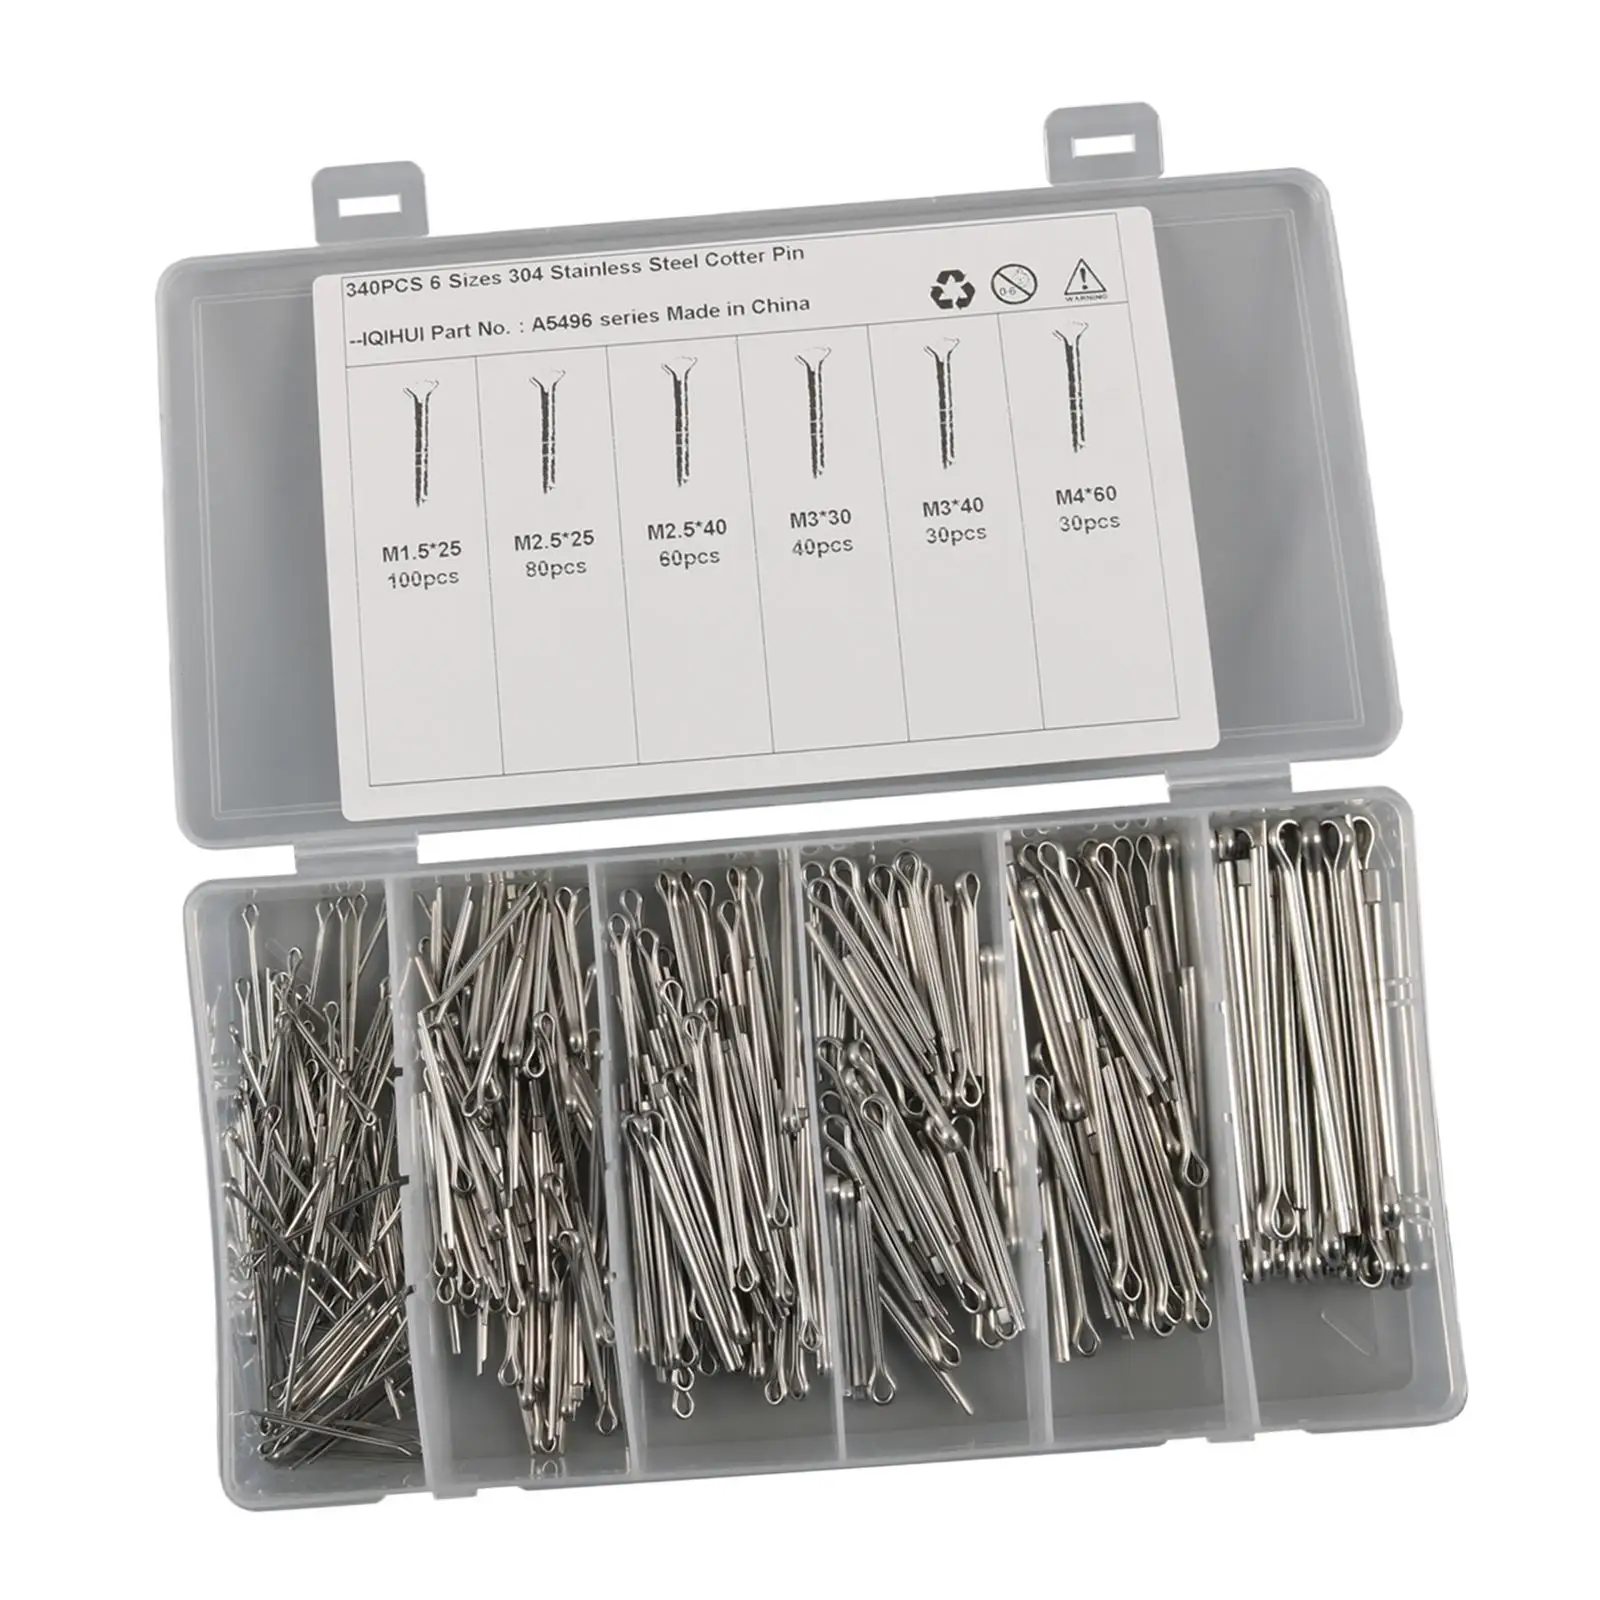 340 Pcs Holds Pins or Castle Nuts in Place Cotter Pin Assortment Split Pin Fastener Clips Straight Hairpins for Car Garage